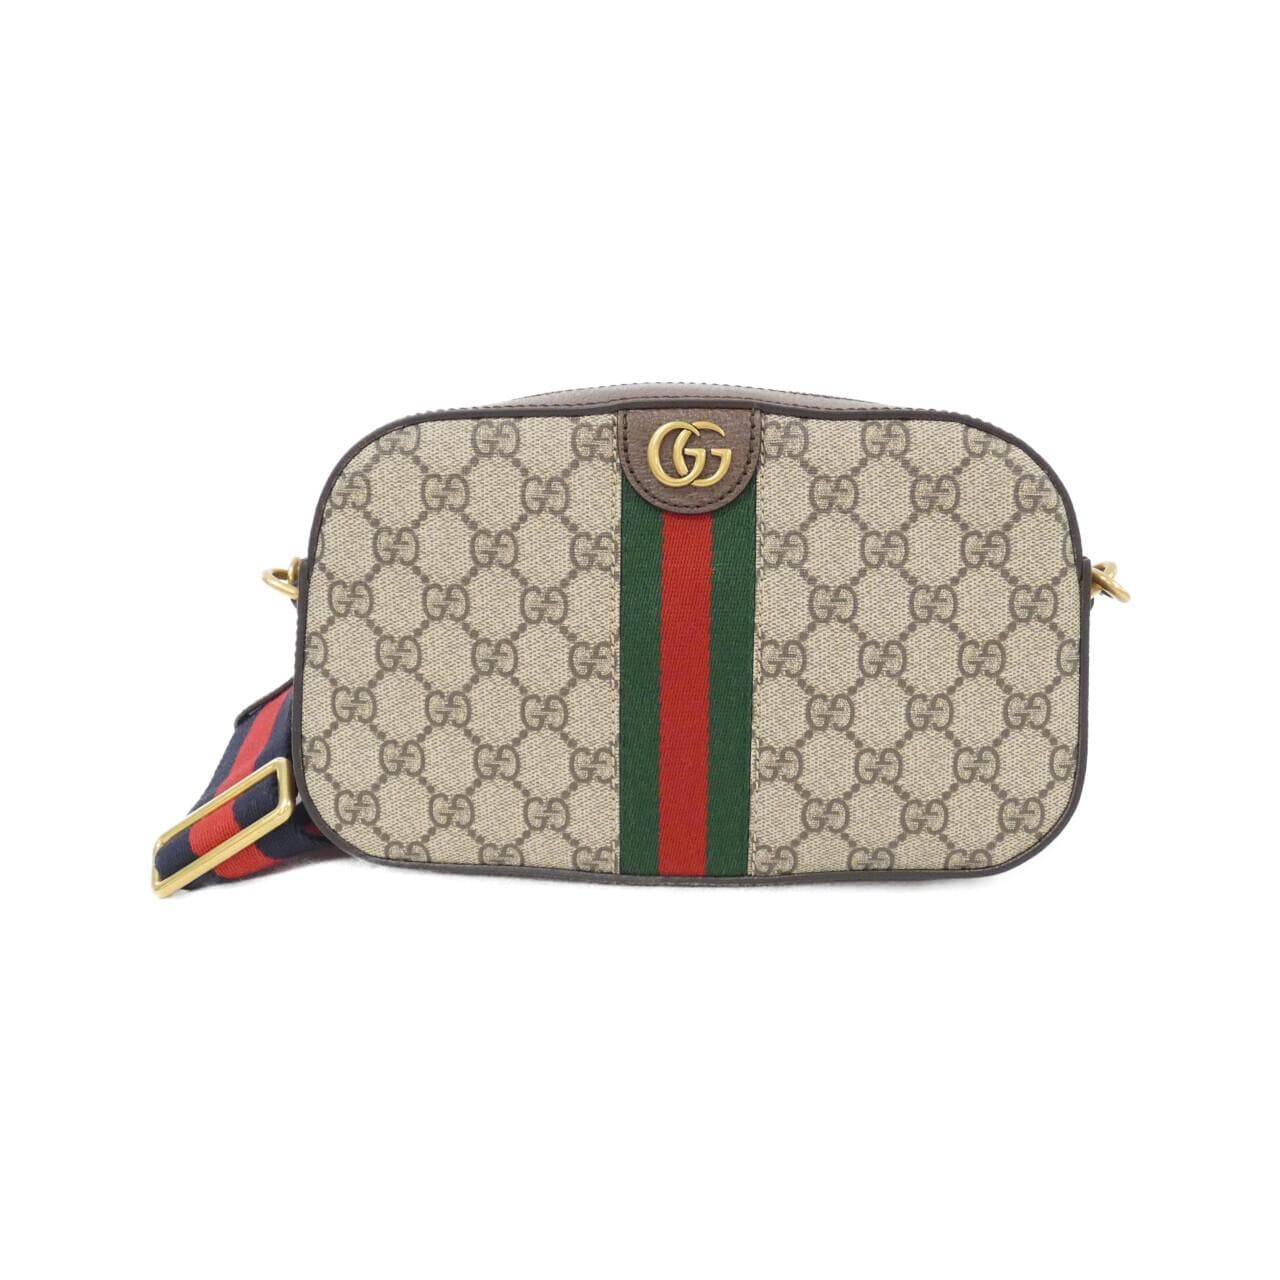 [BRAND NEW] Gucci OPHIDIA 752591 FACFW Shoulder Bag